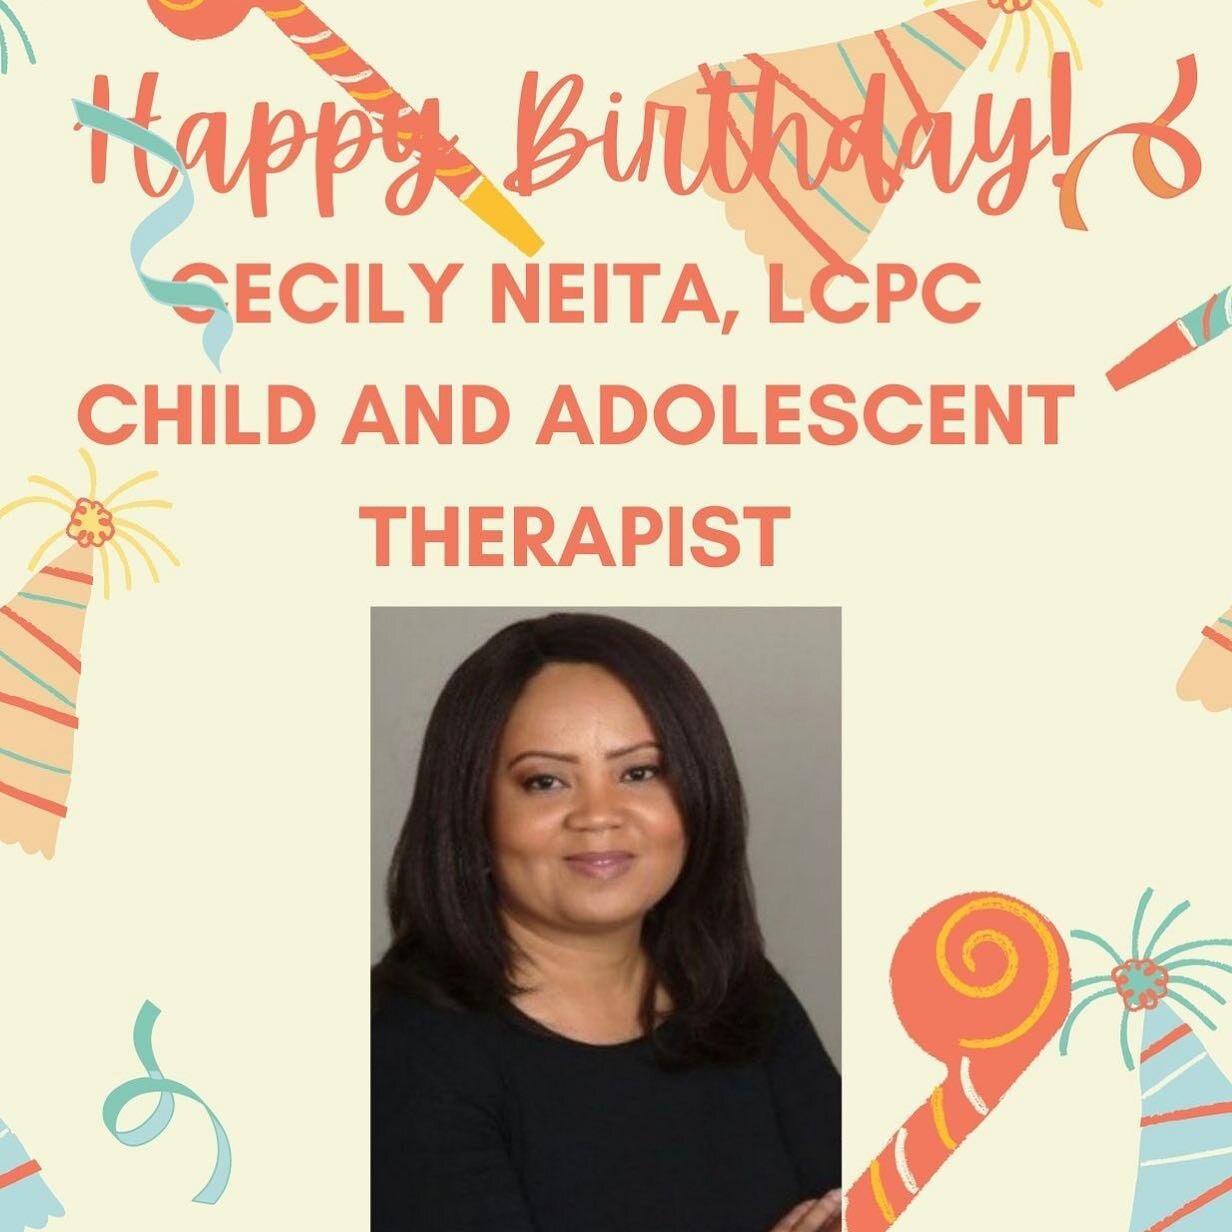 Wishing a very Happy Birthday to our Child &amp; Adolescent Therapist, Cecily Neita @cmneita ! Thank you for your dedication to the clients and communities we serve! May you reap blessings in abundance! 

#HappyBirthday 
#BirthdayBlessings #BlackTher